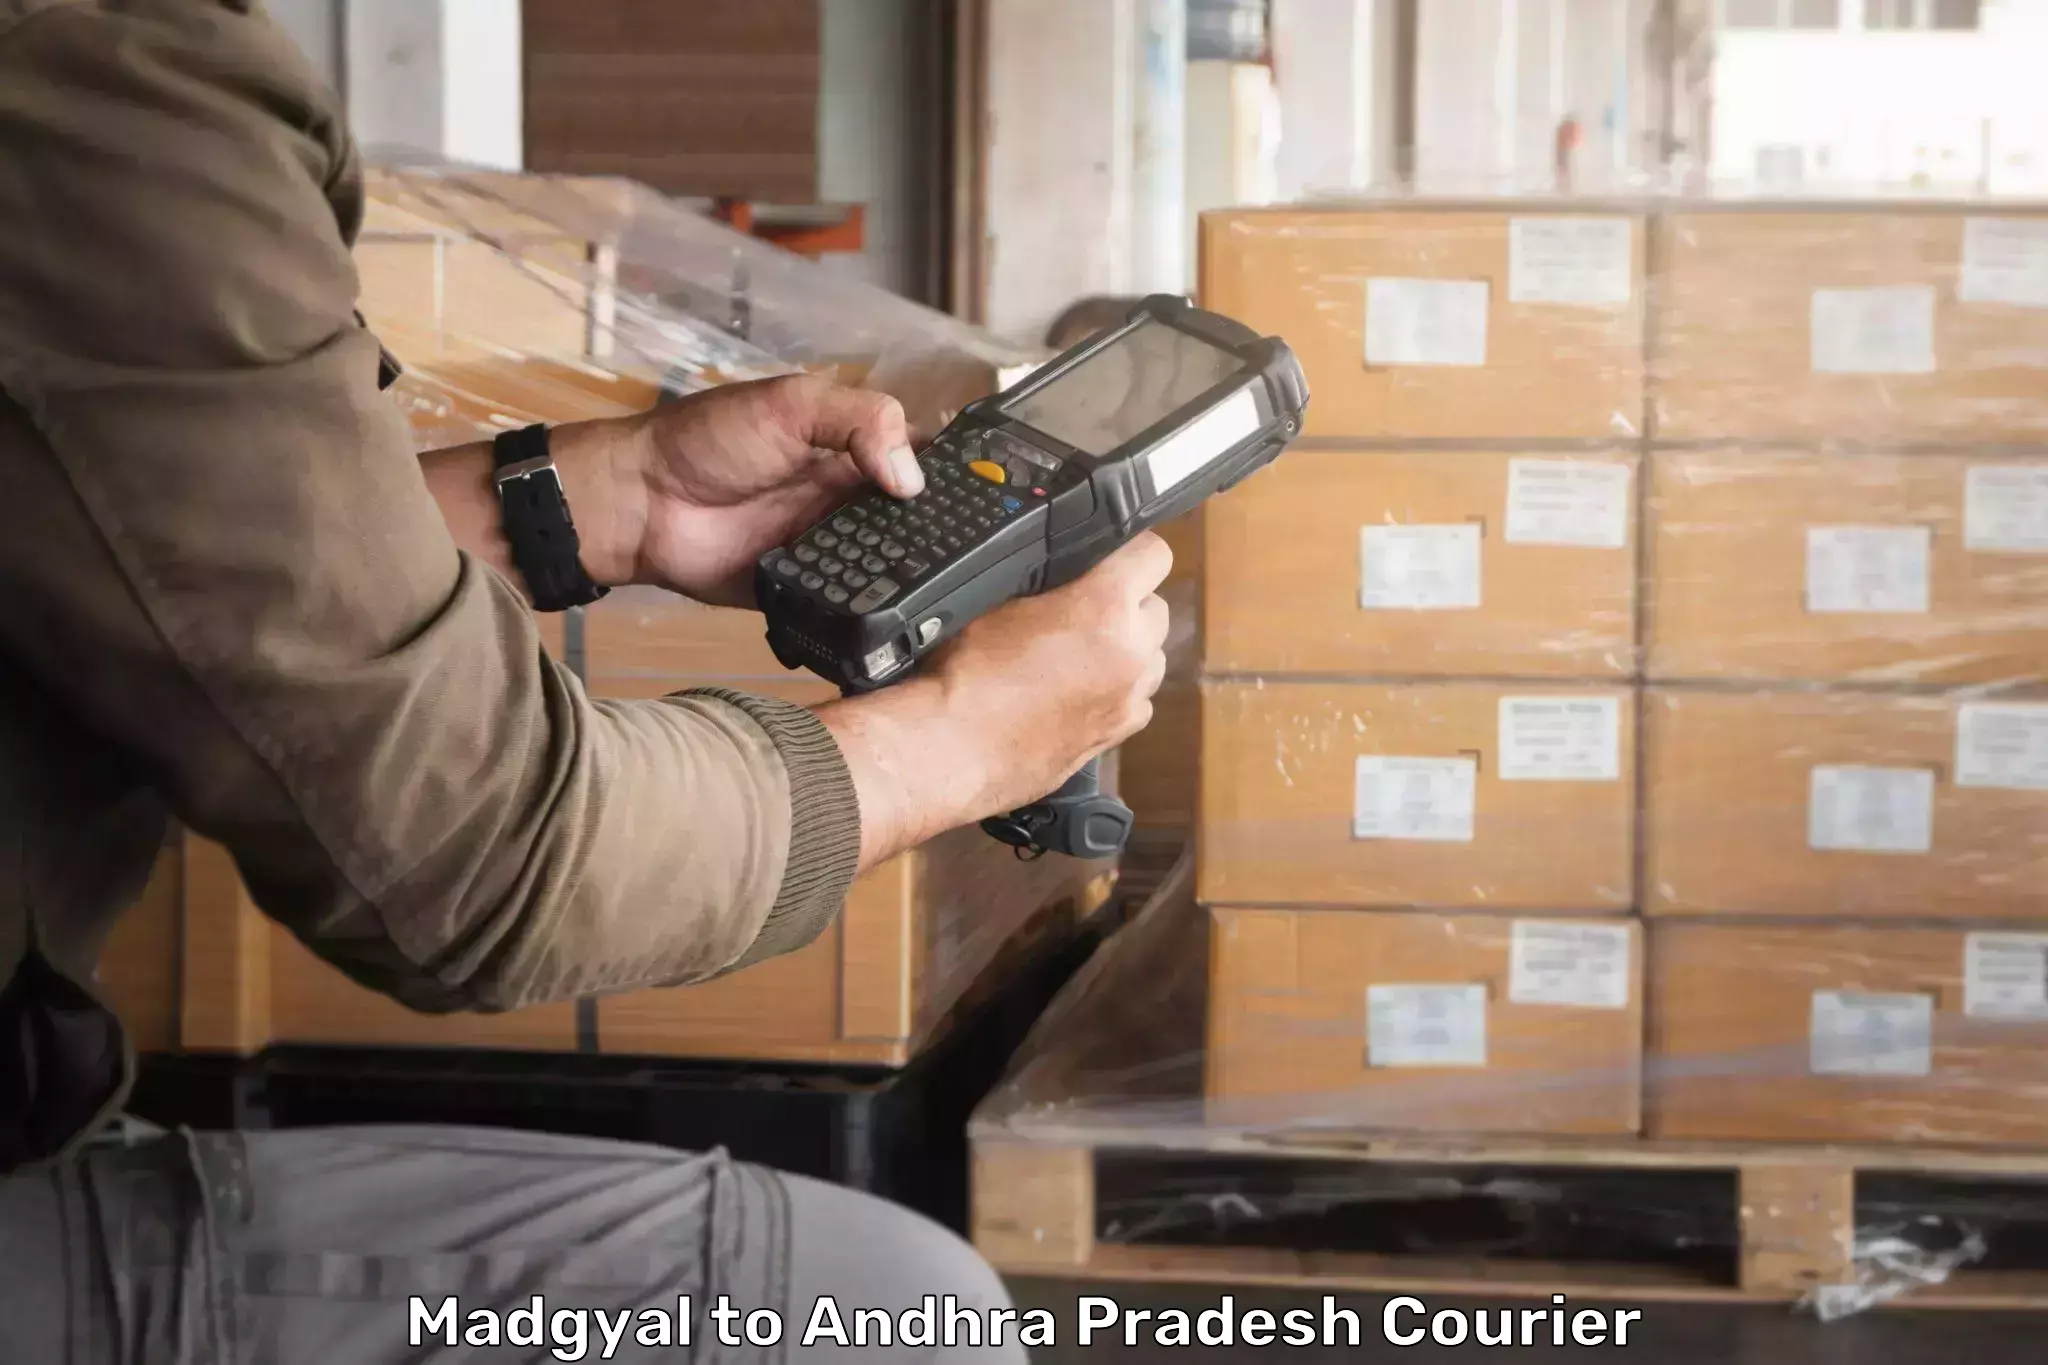 High value parcel delivery in Madgyal to Nellore